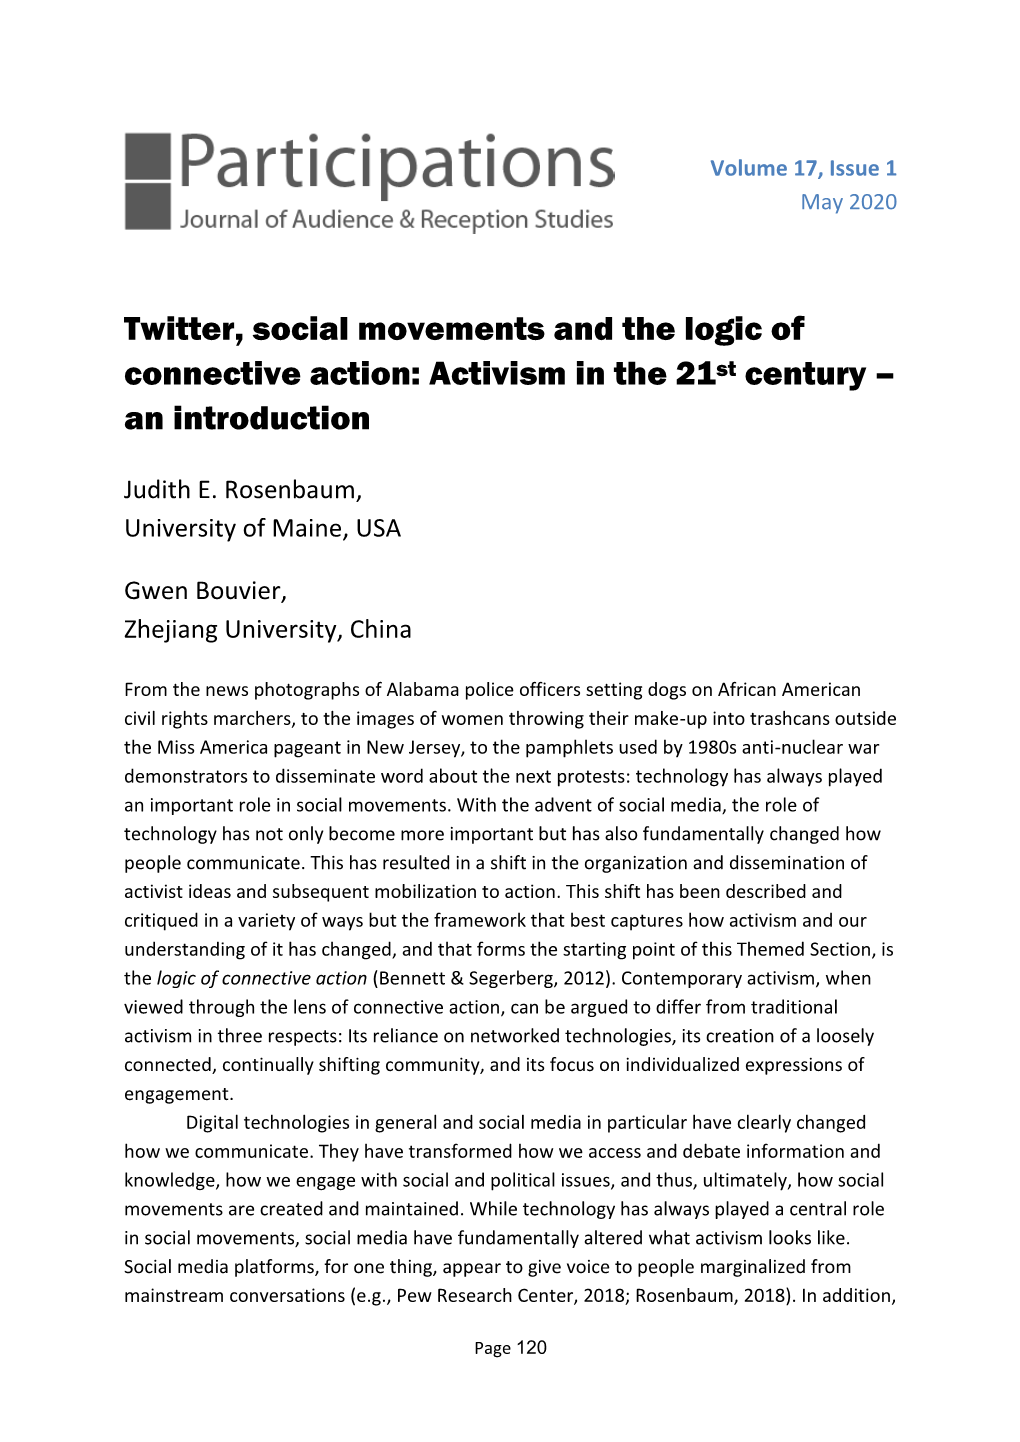 Twitter, Social Movements and the Logic of Connective Action: Activism in the 21St Century – an Introduction